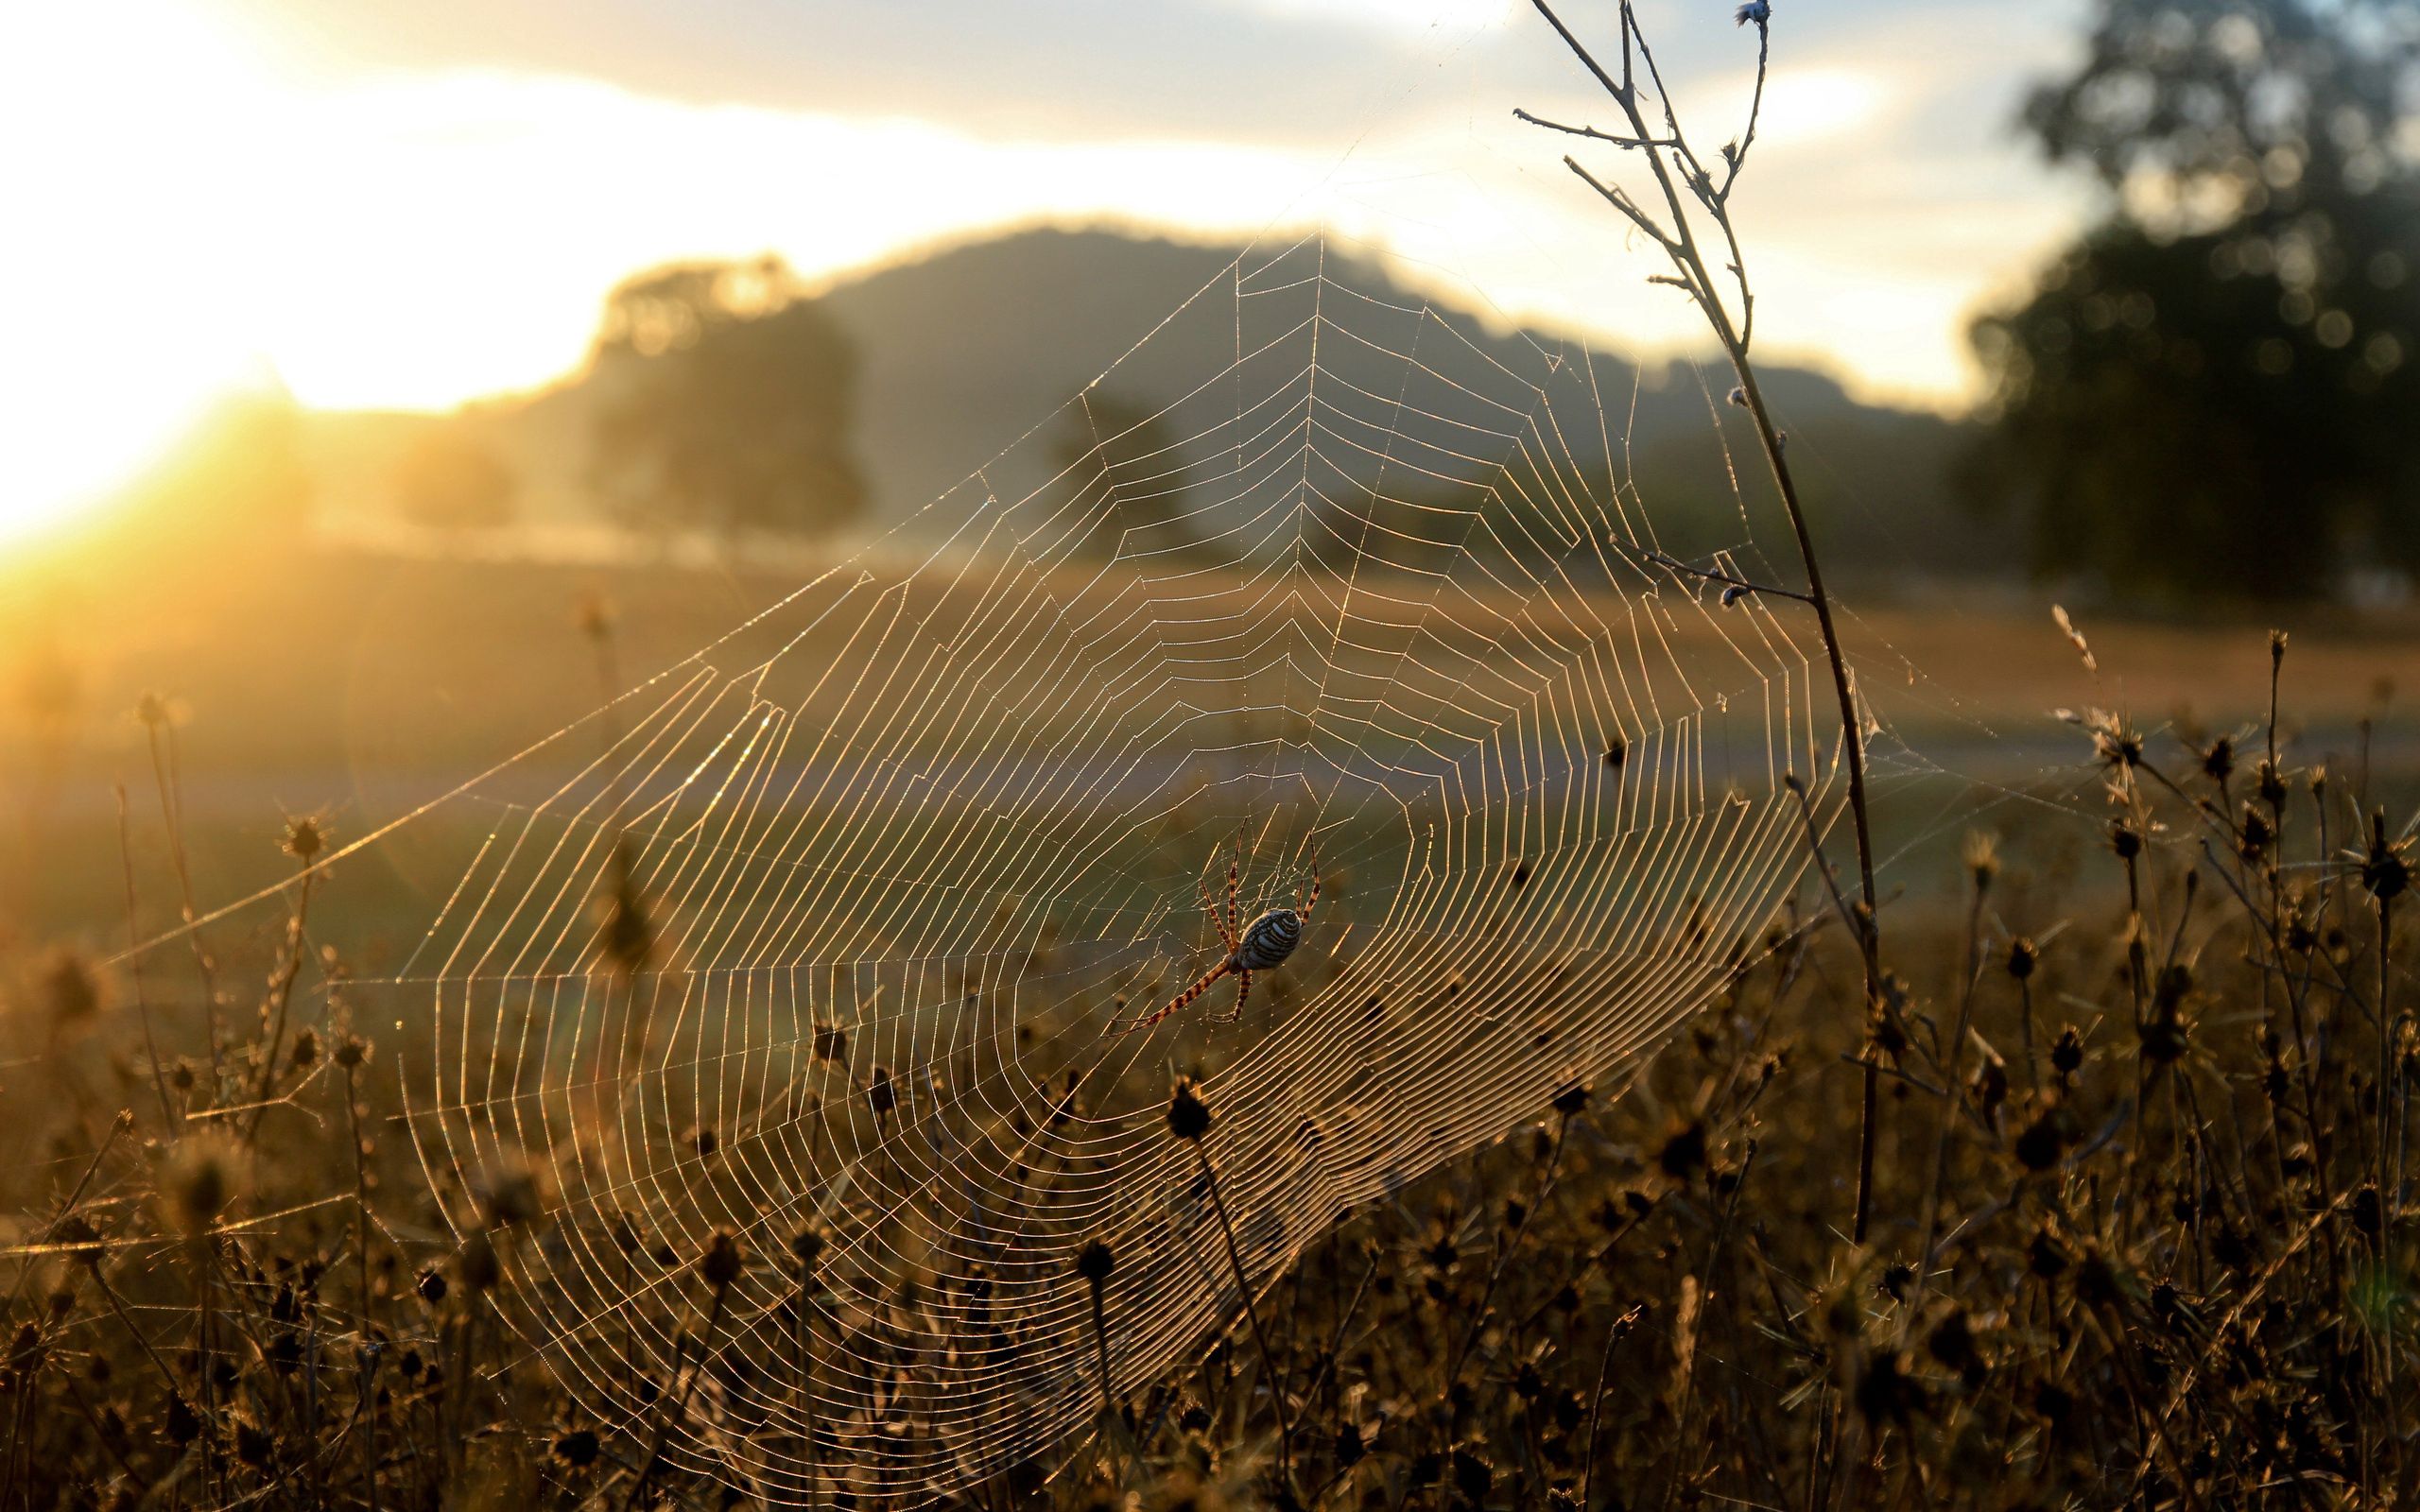 dry, withered, nature, grass, sun, web, shine, light, it's a sly, spider